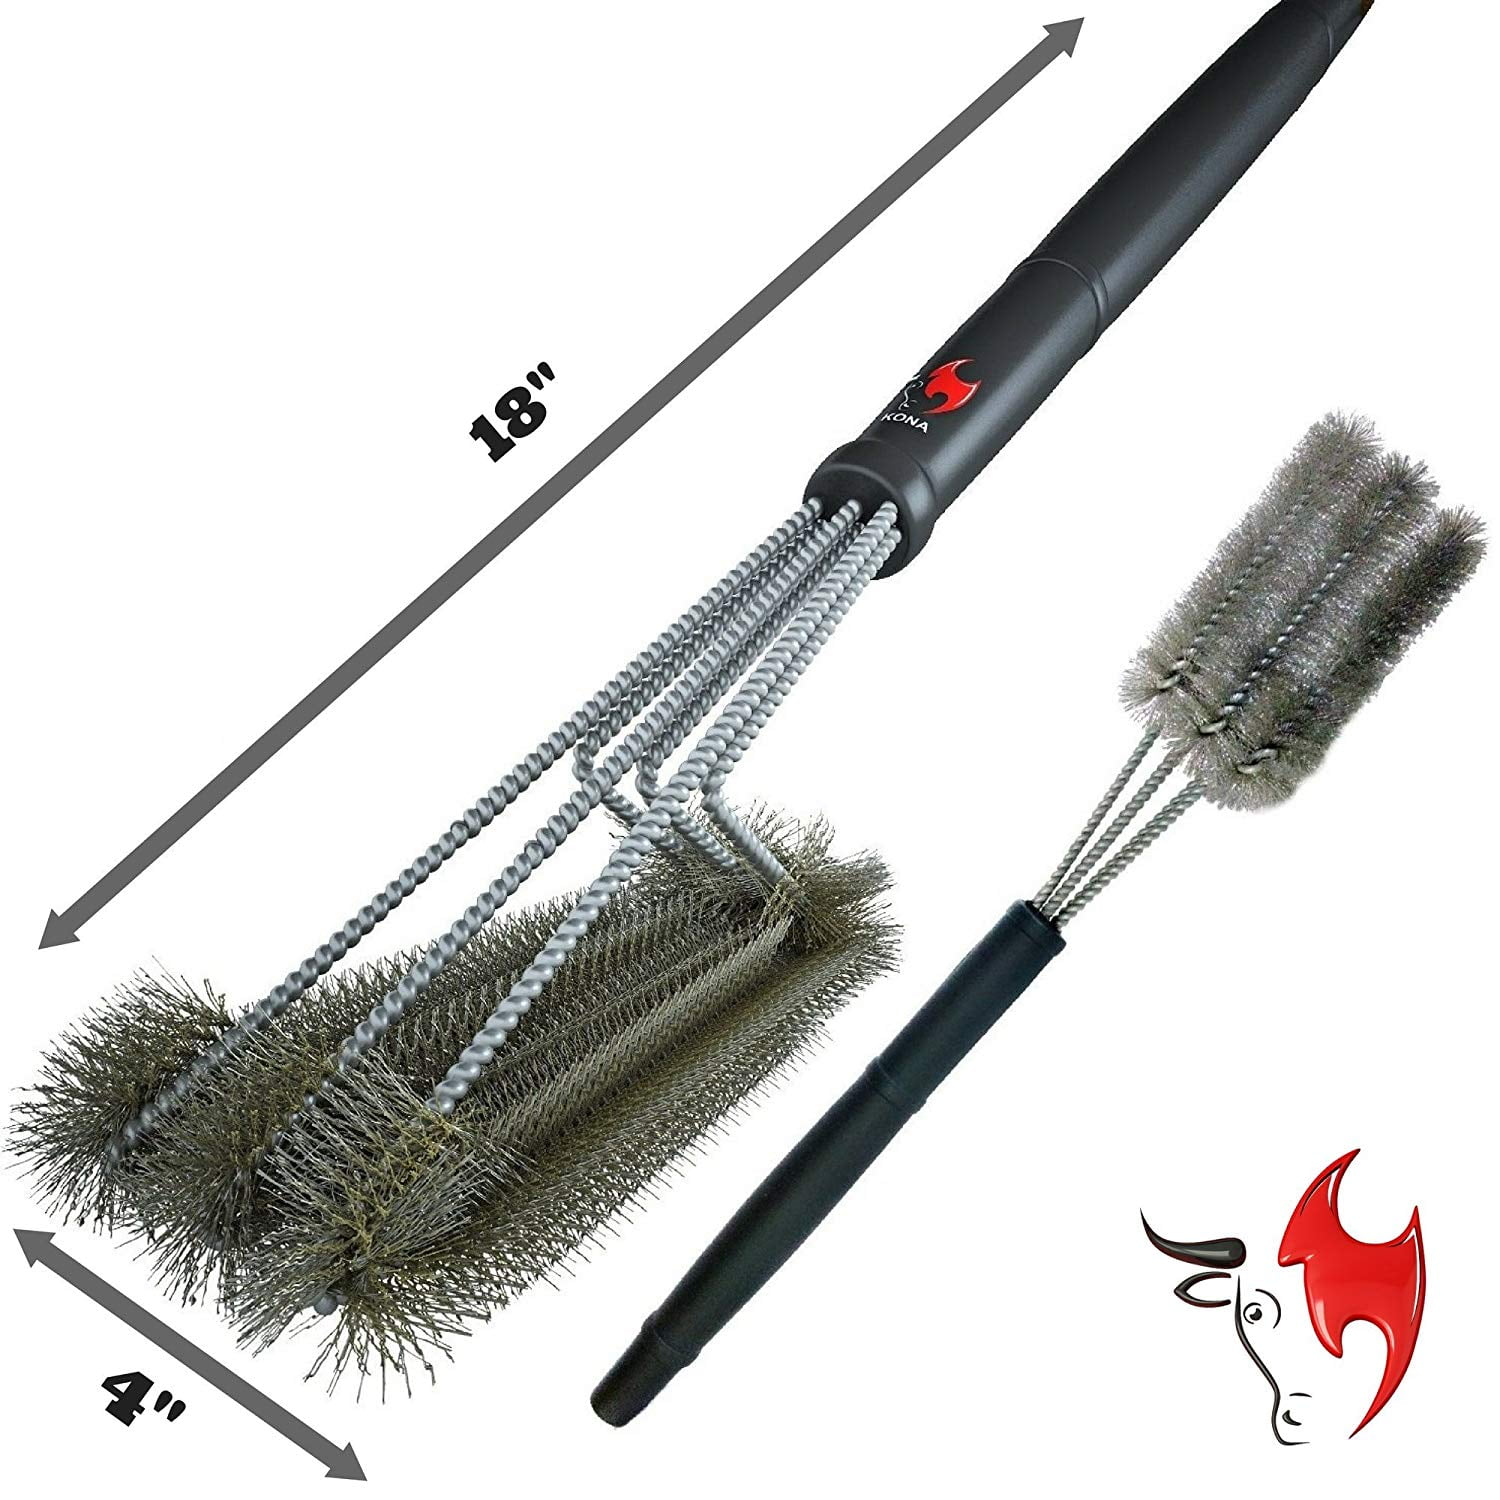 Kona 360° Clean Grill Brush Stainless Steel 3-in-Grill Cleaner